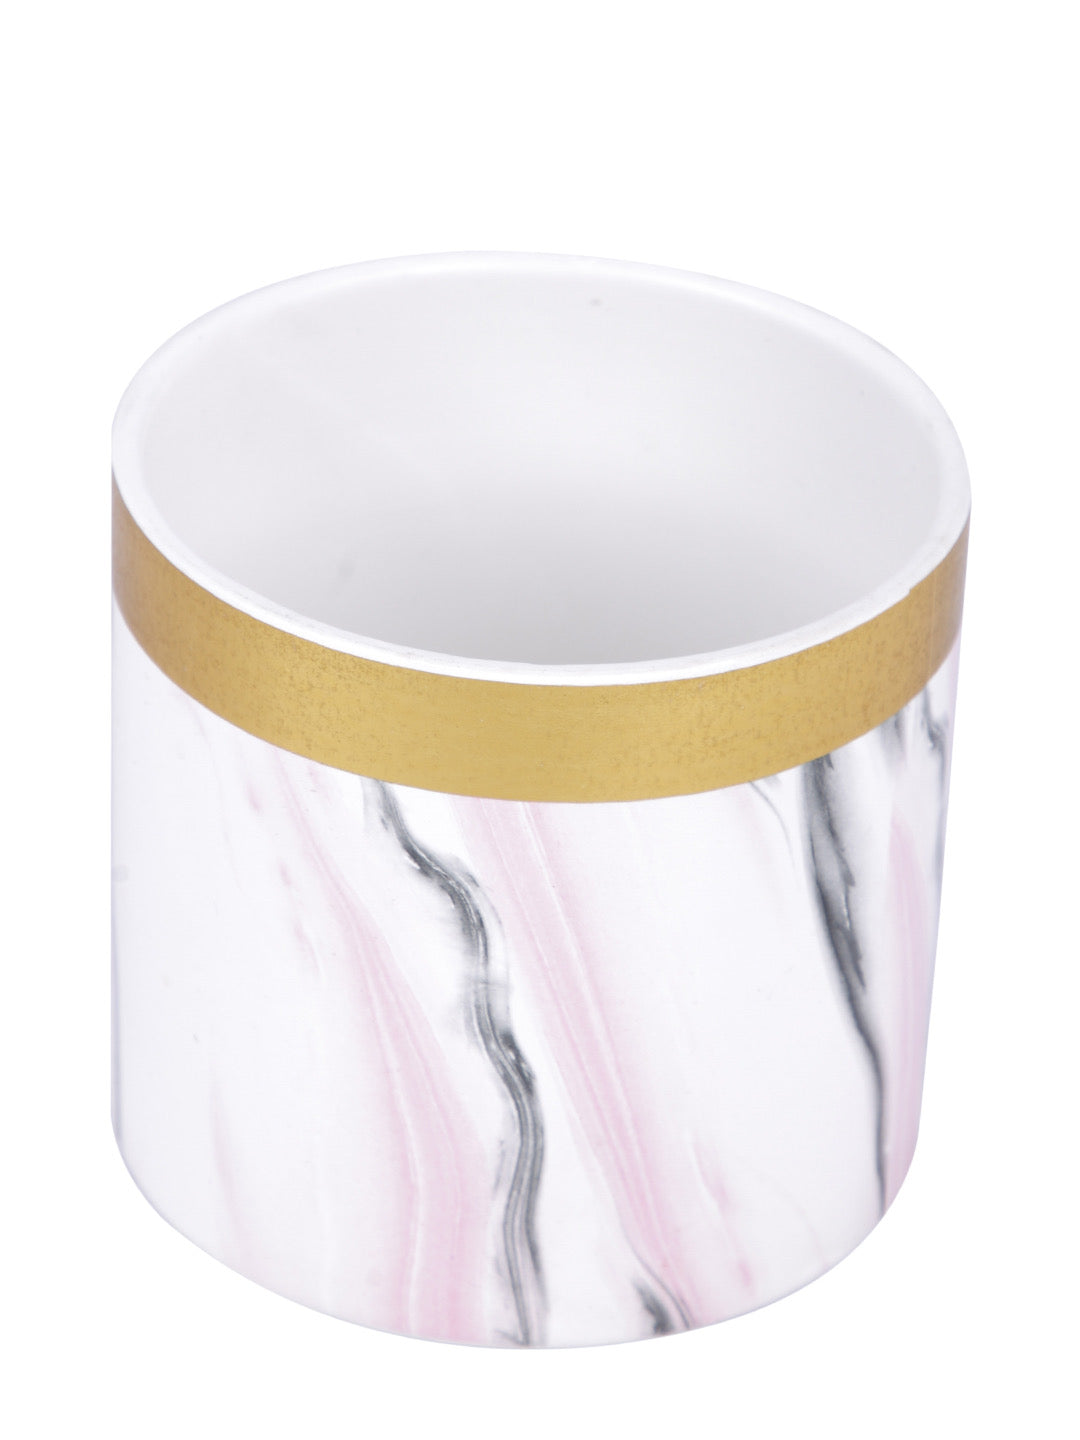 Ceramic Planter with Marble Pattern in Baby Pink shades - Default Title (CHC22385C)